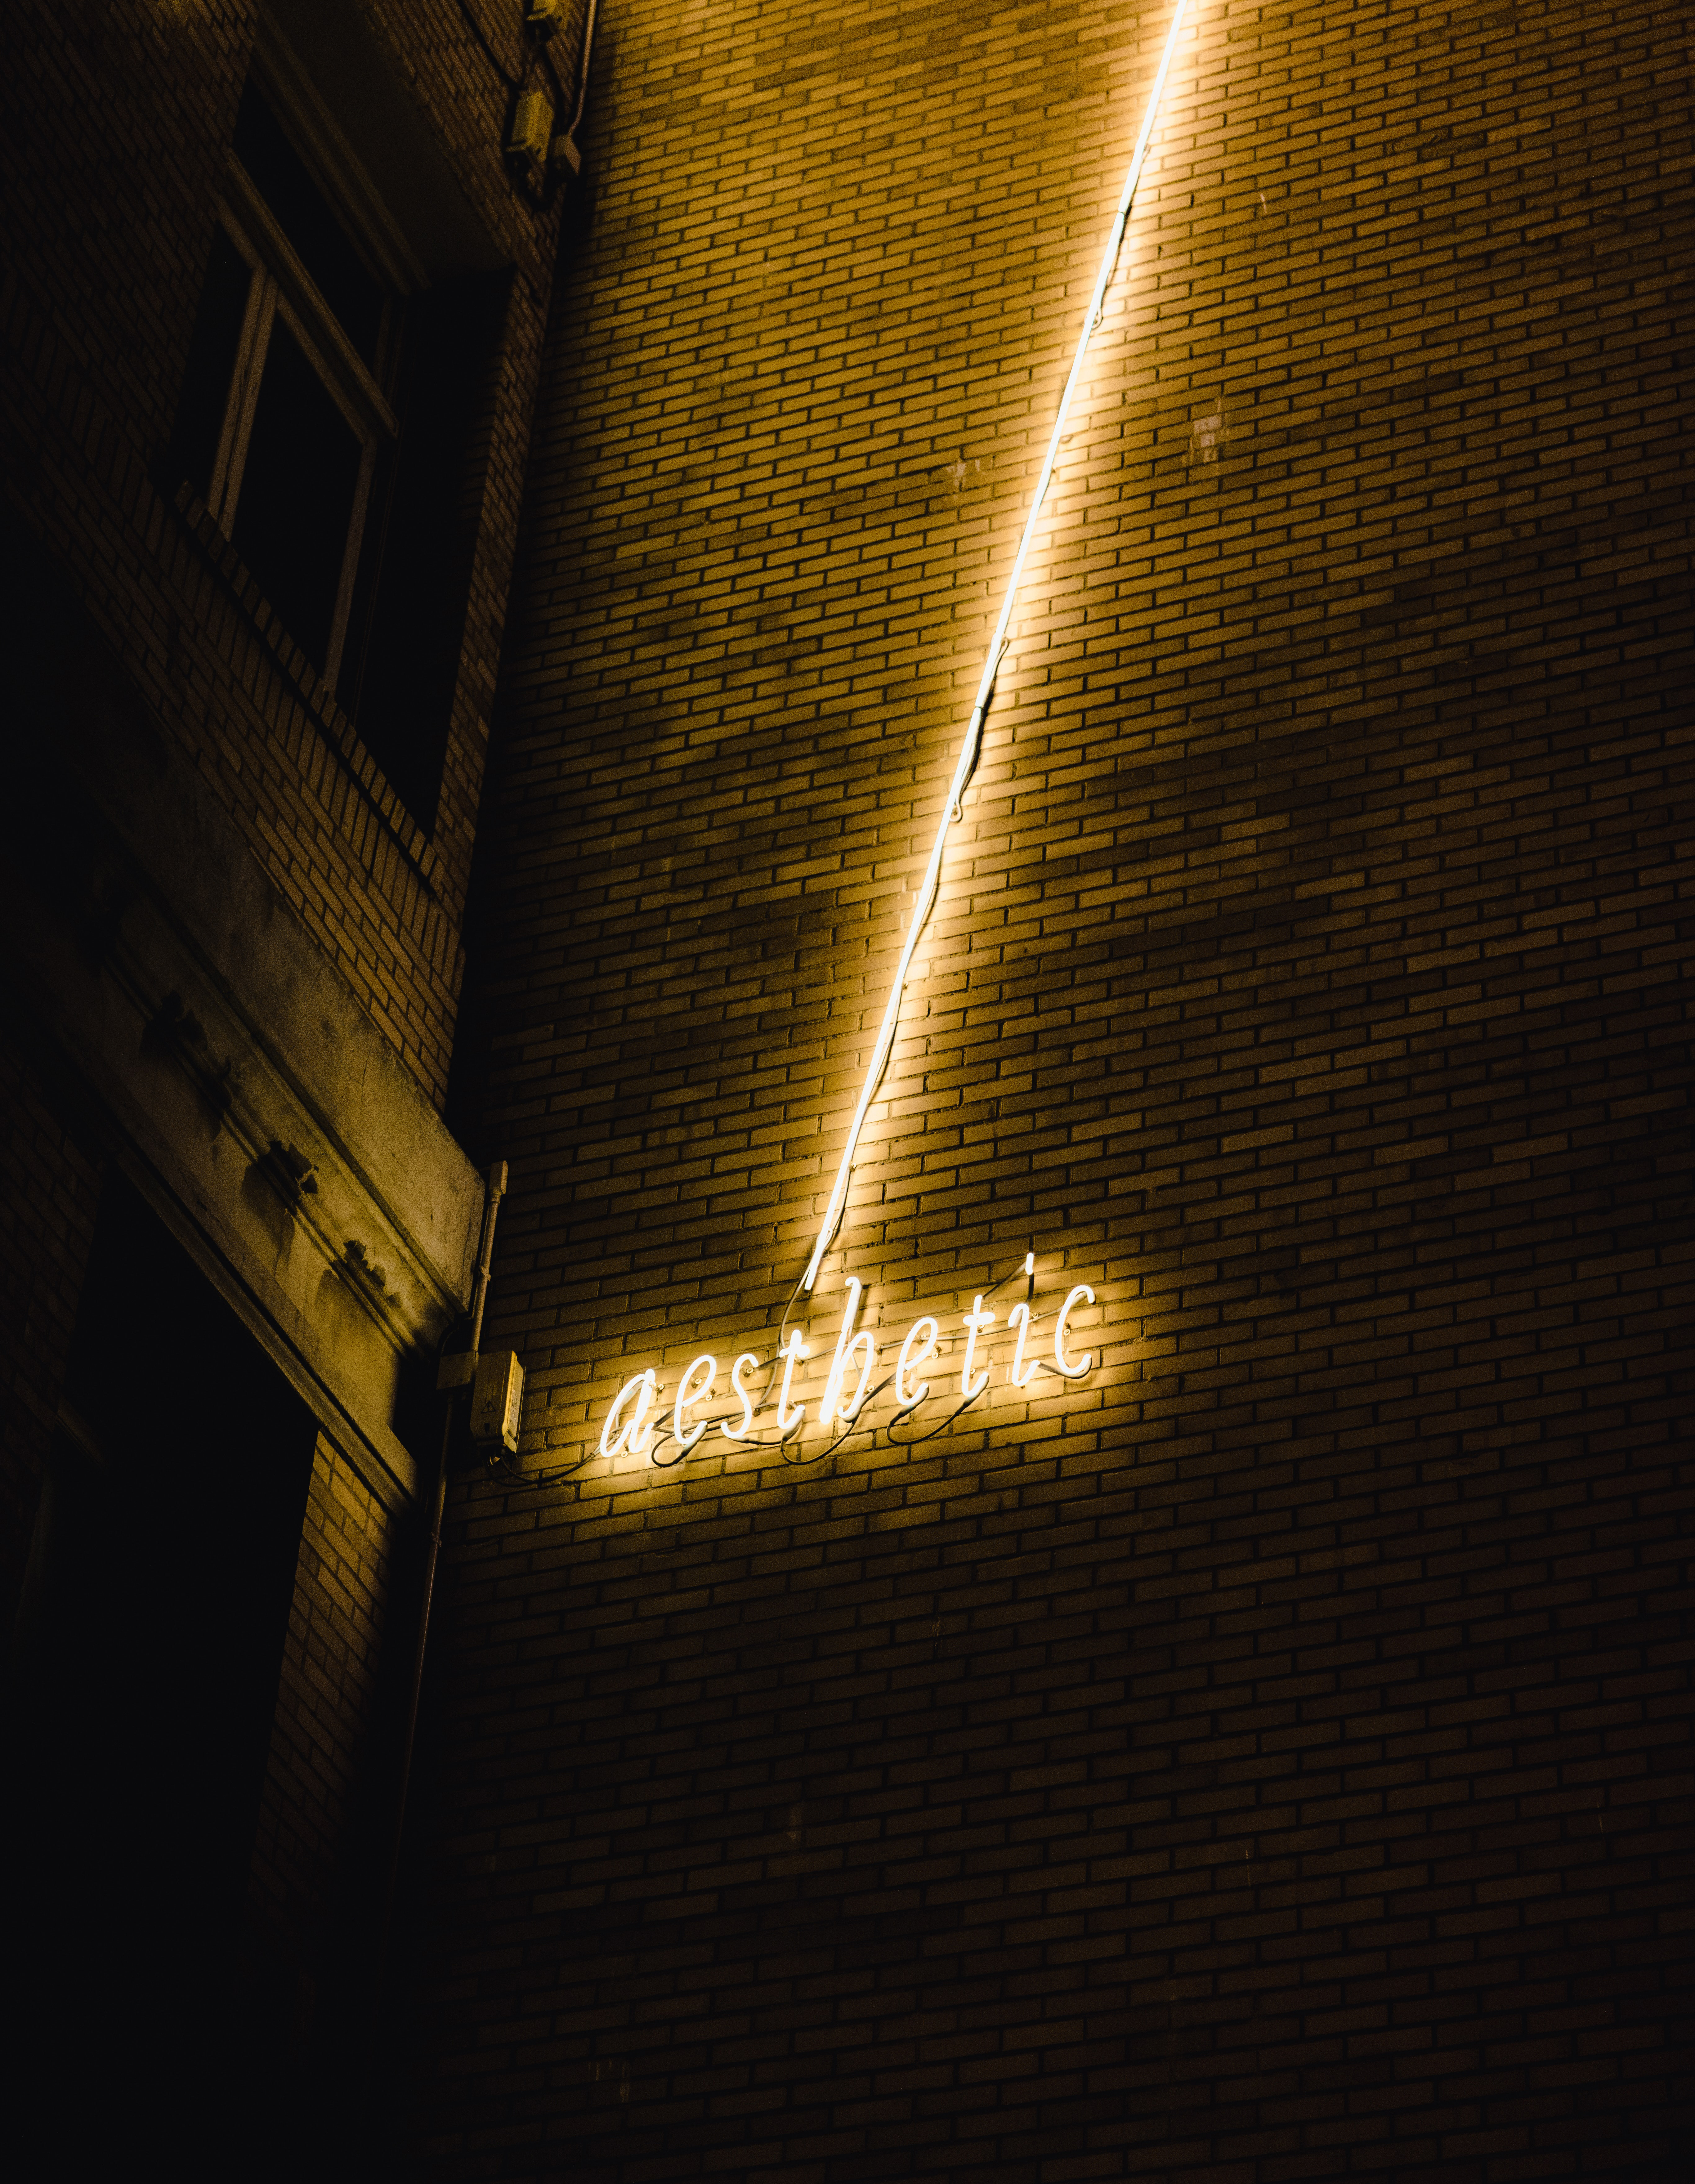 words, wall, neon, inscription, word, aesthetics High Definition image